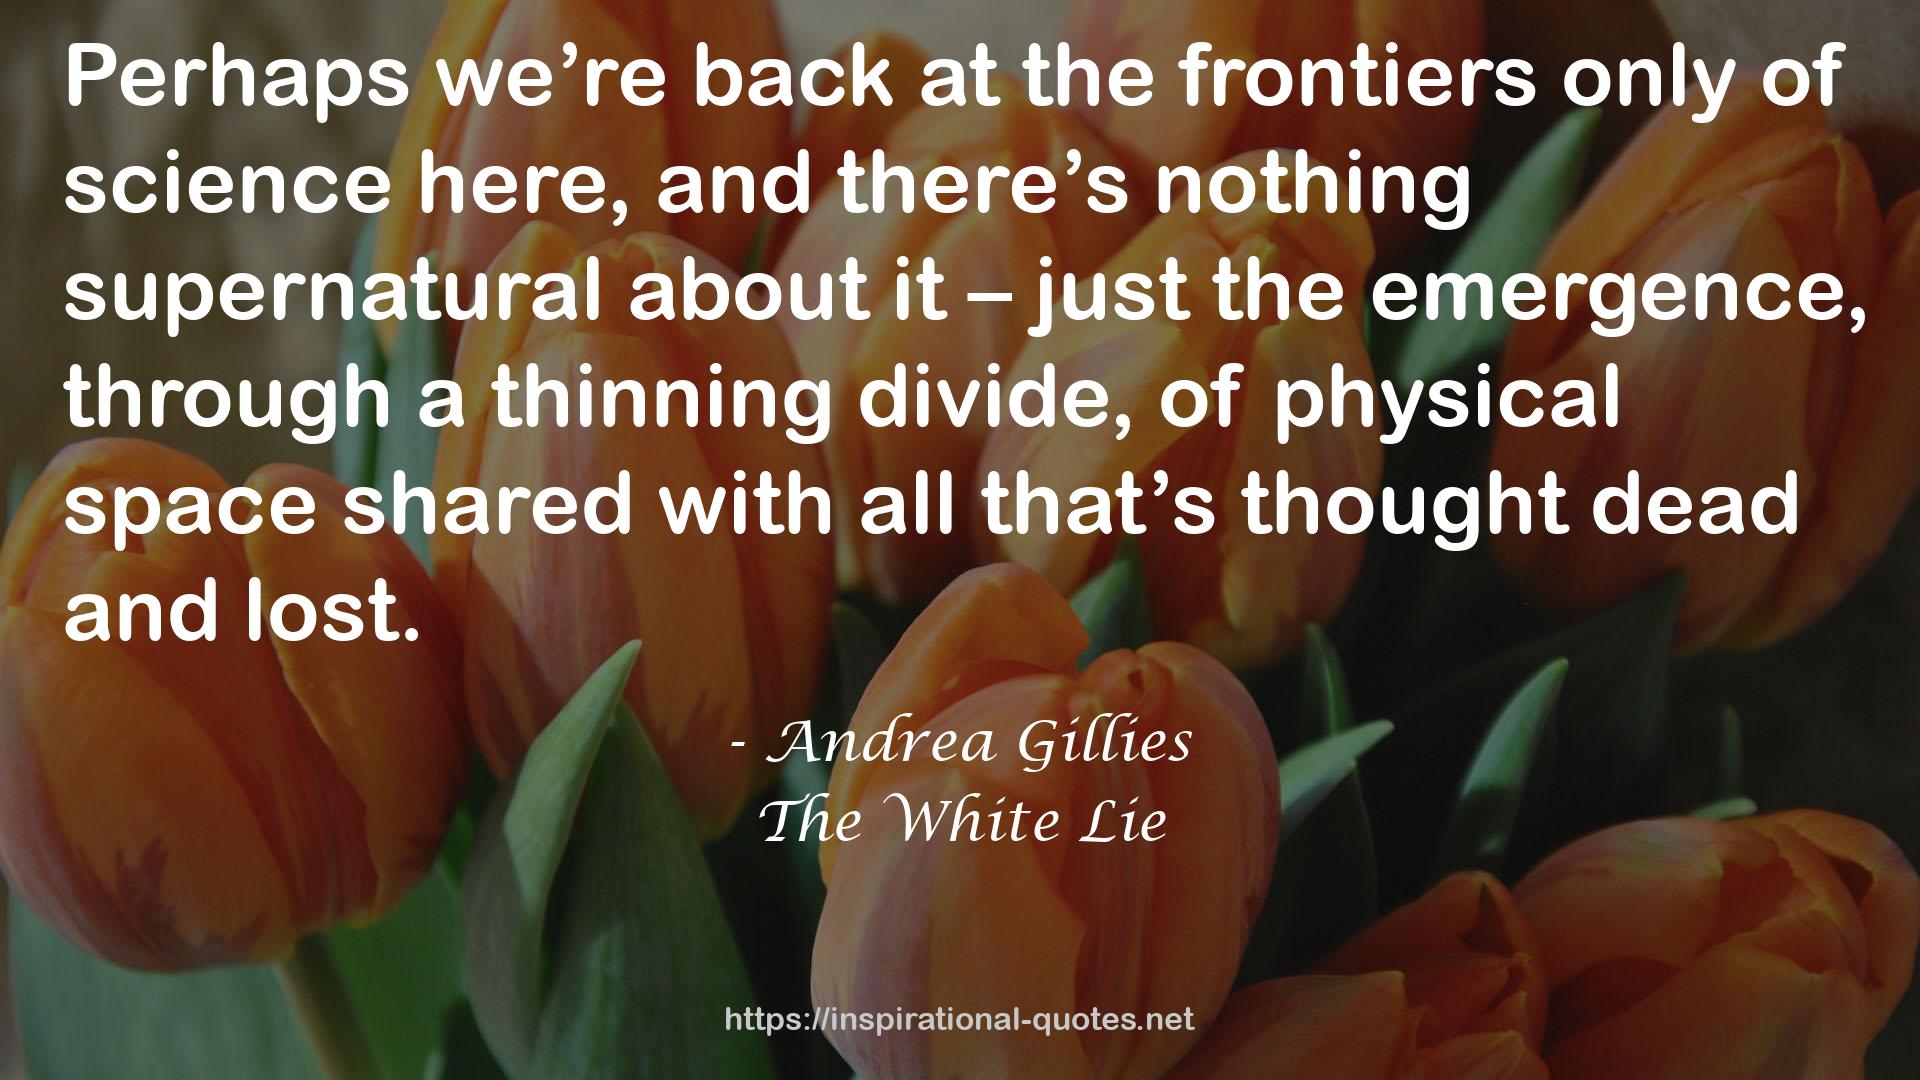 Andrea Gillies QUOTES